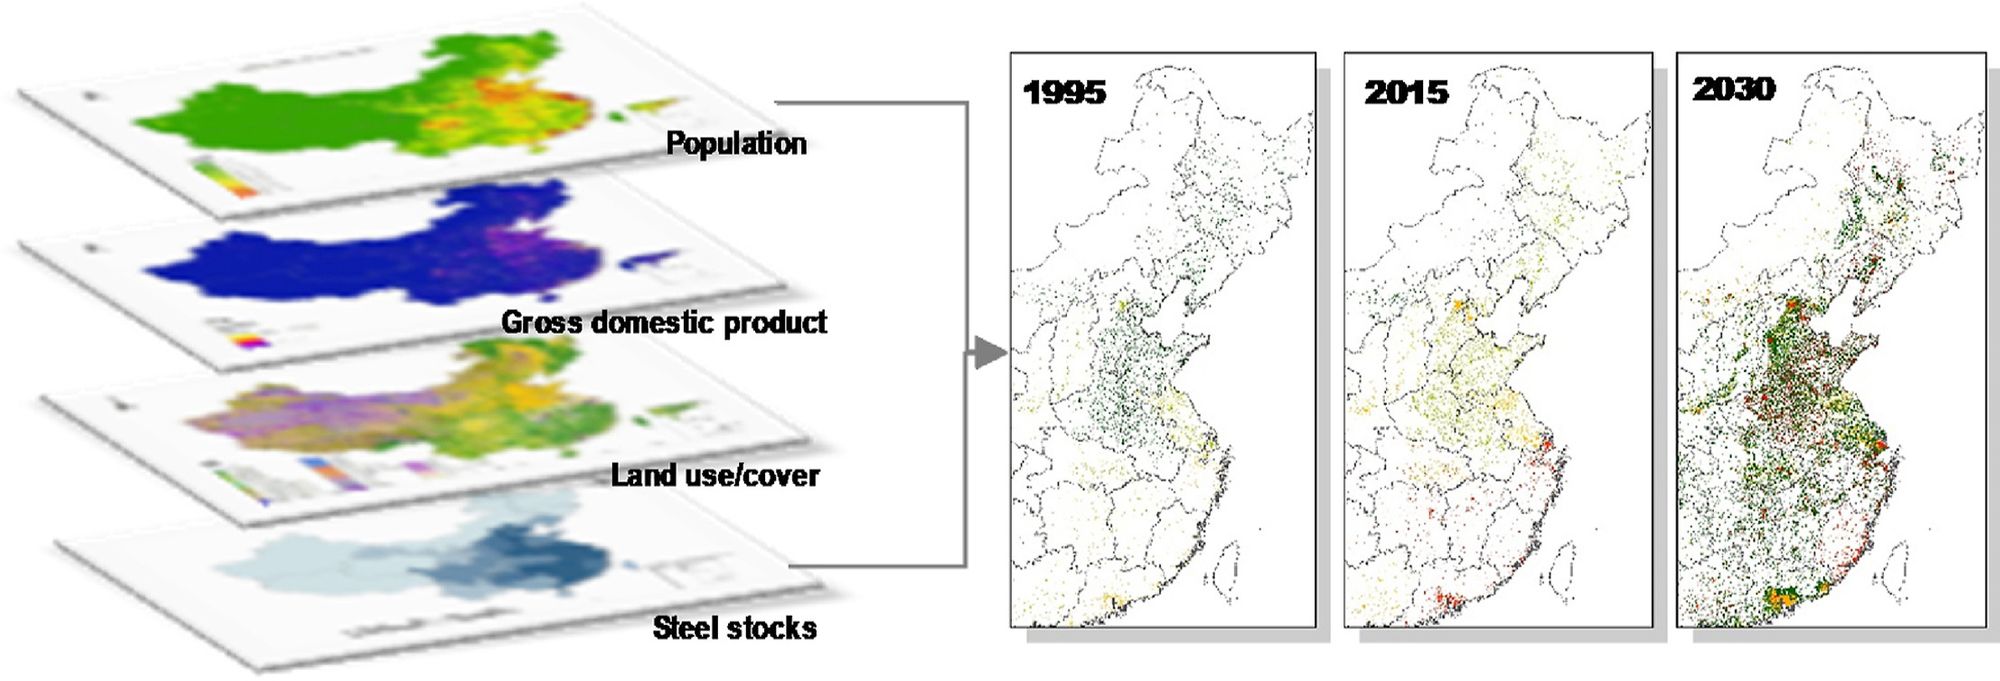 High spatial resolution mapping of steel resources accumulated above ground in mainland China: Past trends and future prospects